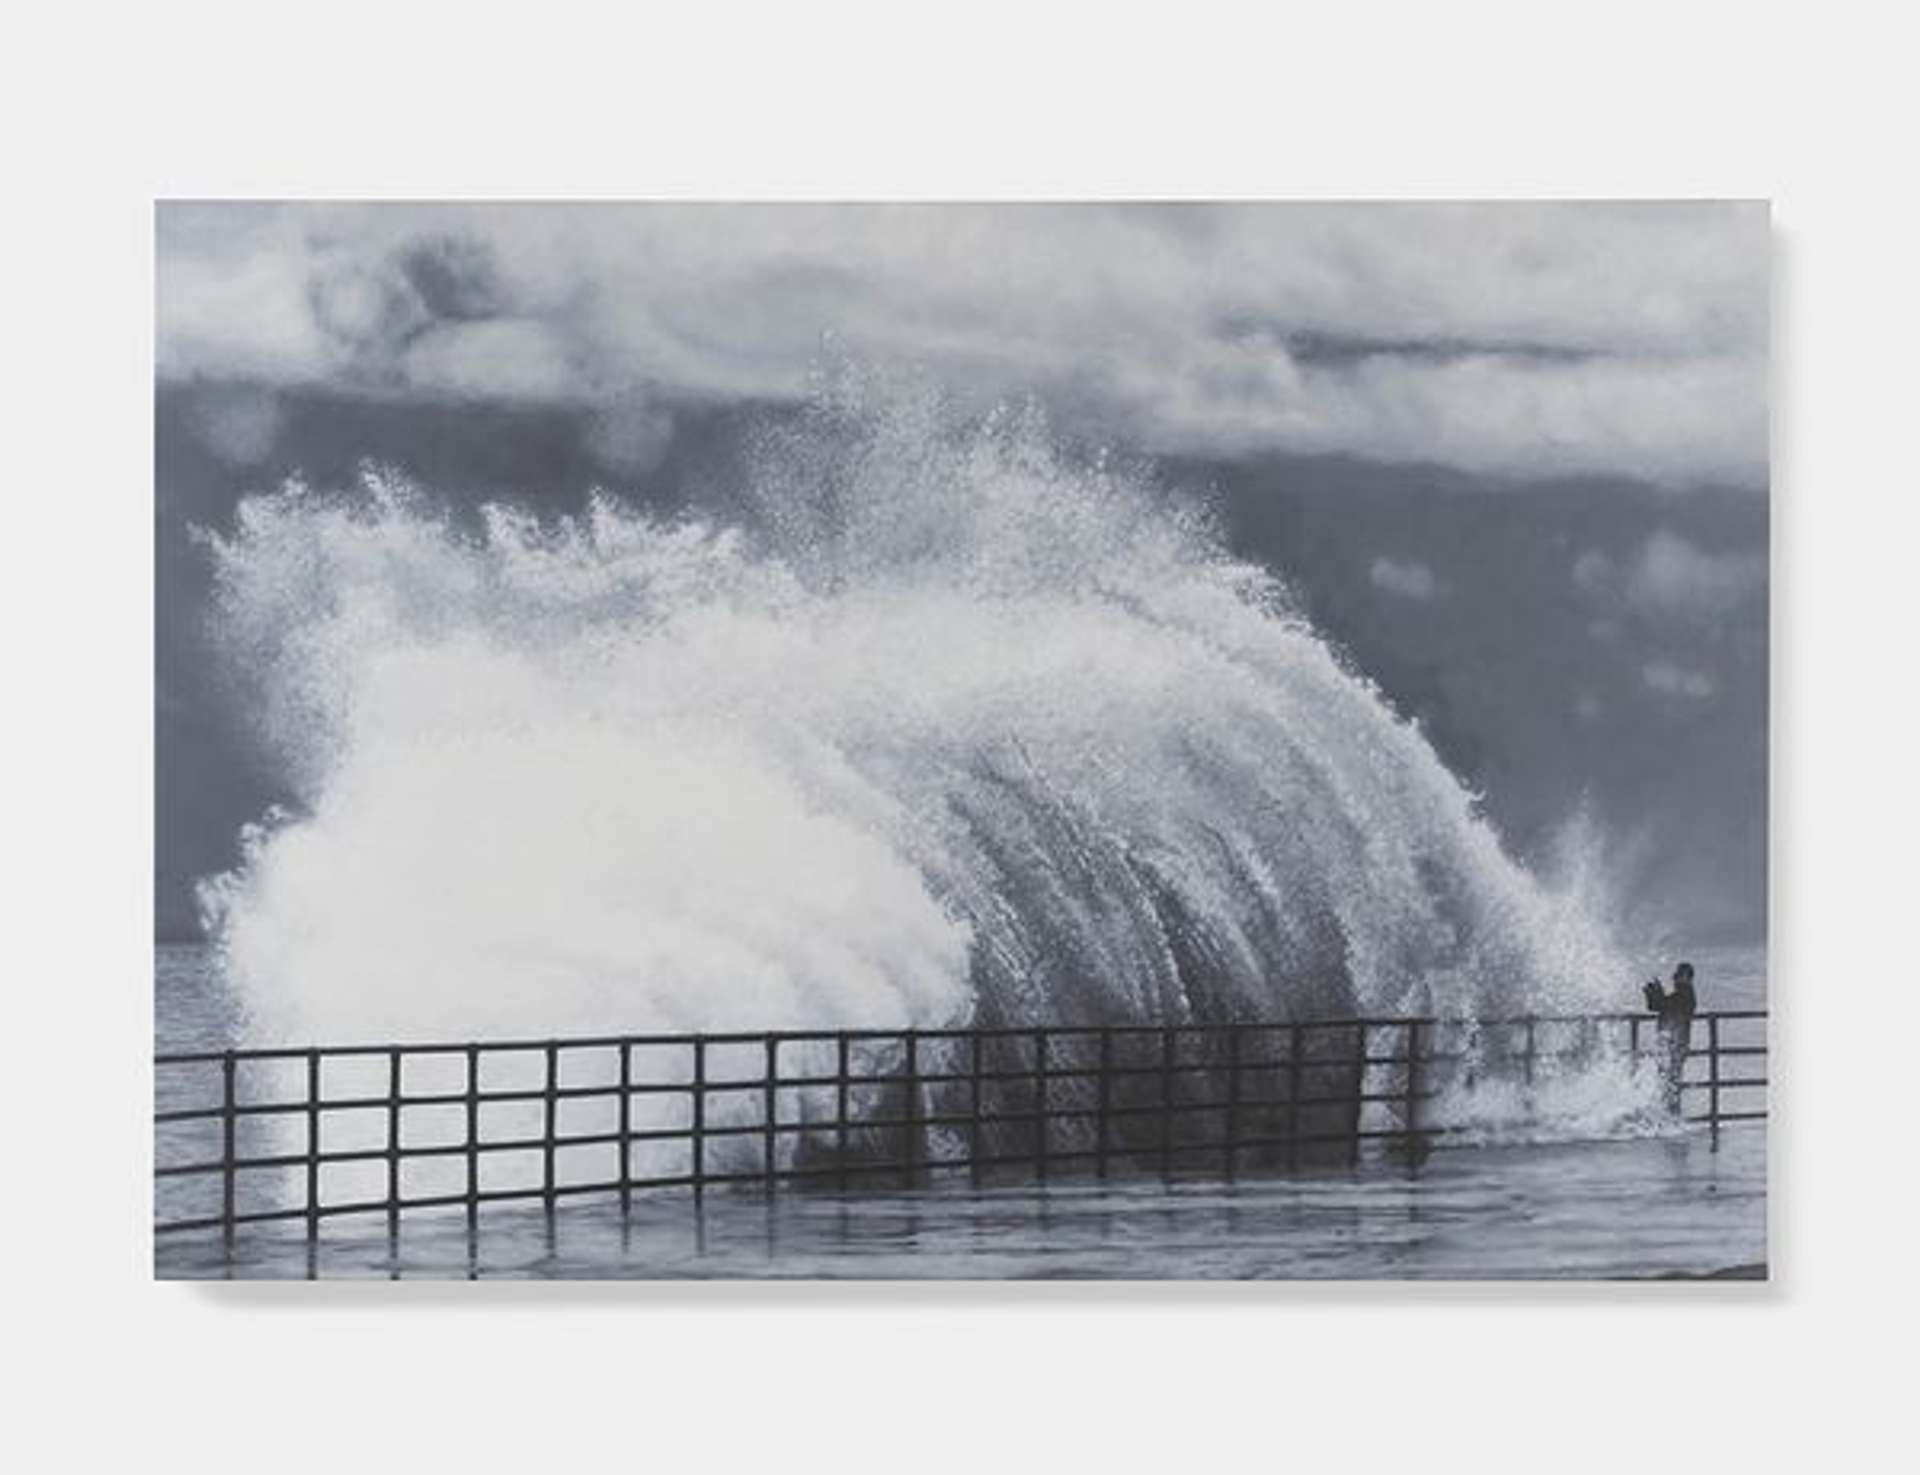 An image of the painting Whitecap by Damien Hirst, showing a large wave overcoming a sea barrier. To the bottom right corner, the figure of a person is hugely outsized by the wave. The painting is done in greyscale.